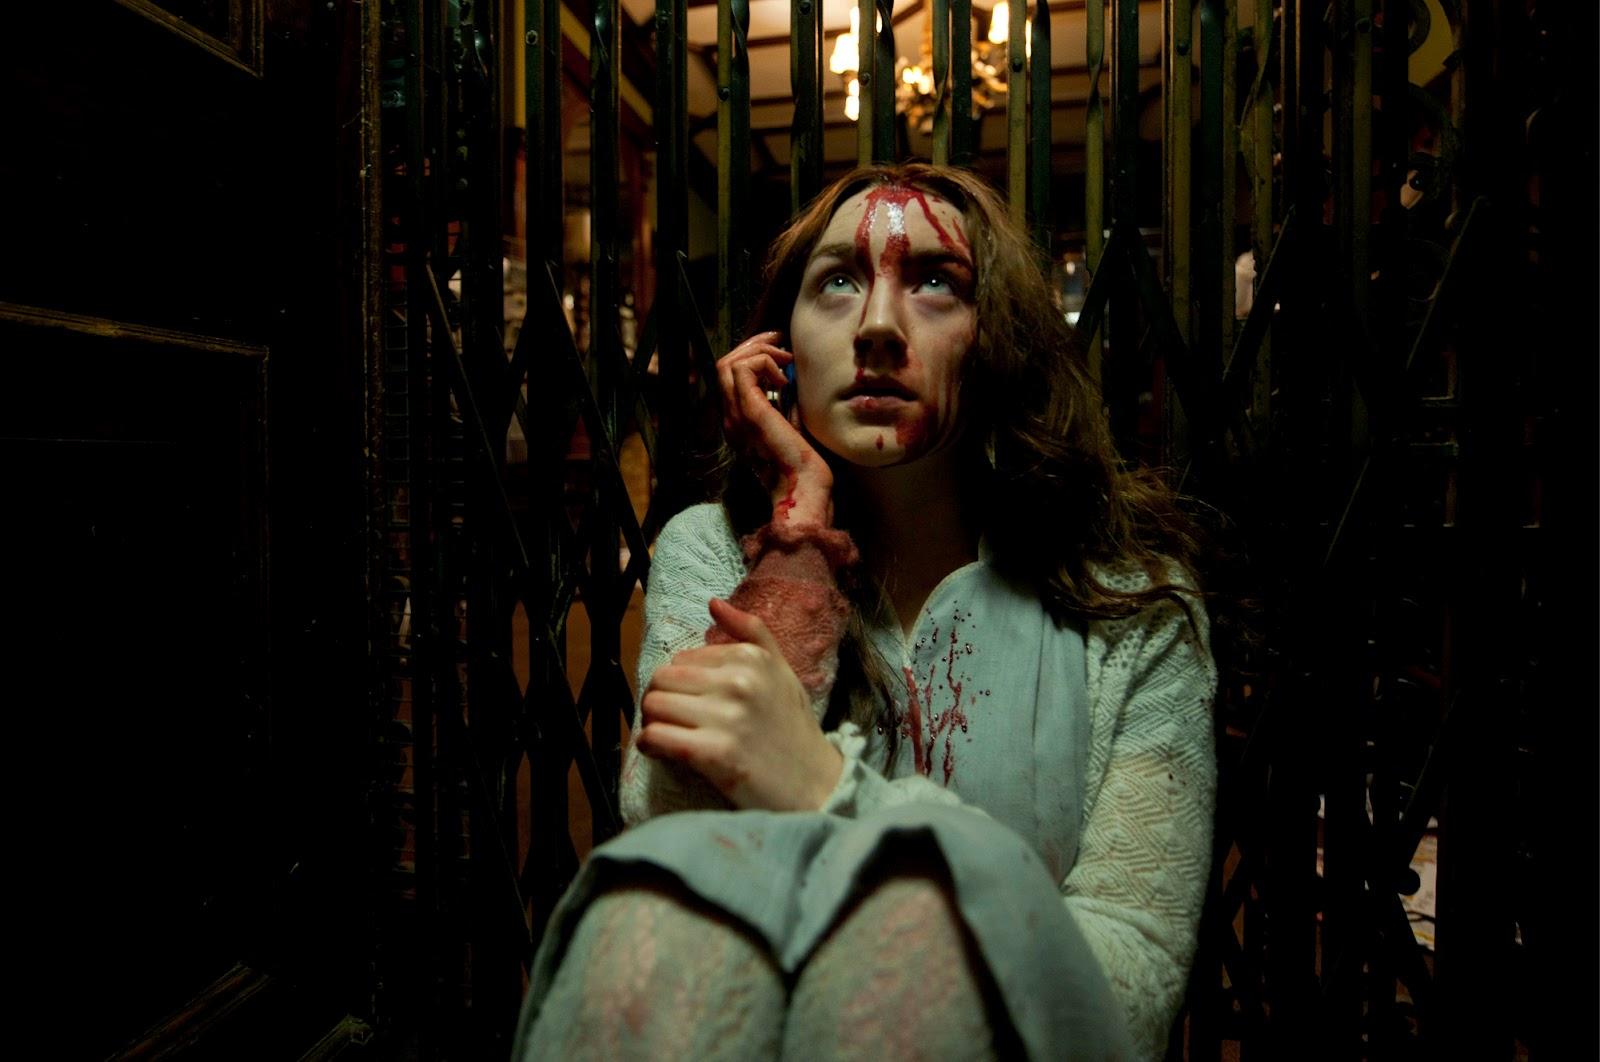 Sitges 2013, Minicríticas DIA 1: “Contracted”, “Byzantium”, “The Colony” y “Antisocial”.